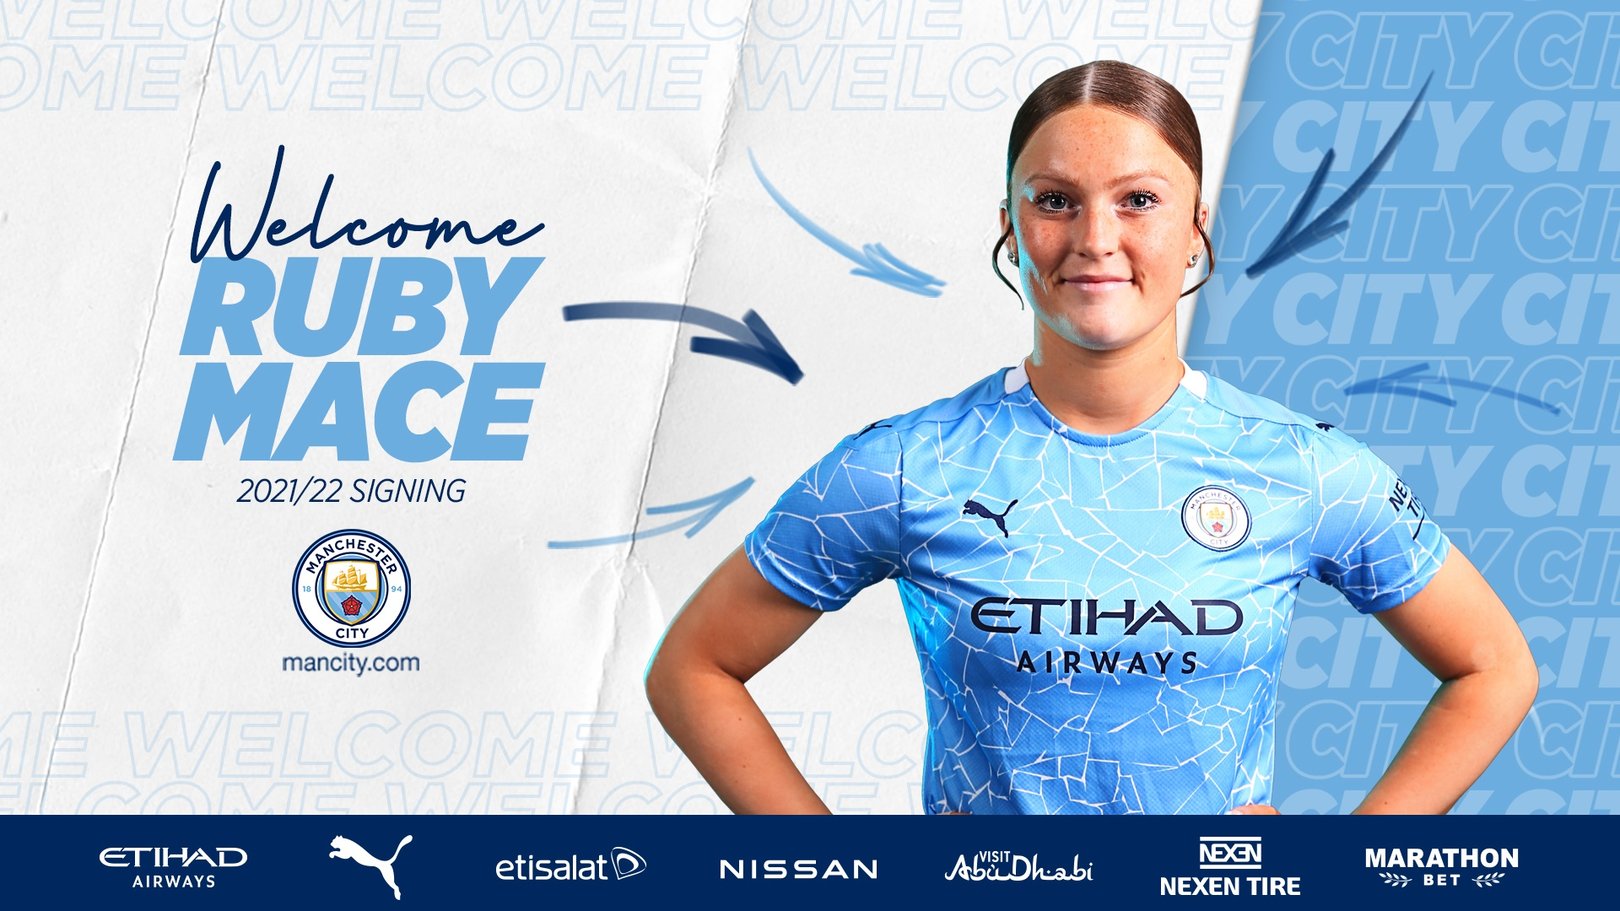 England Youth international Ruby Mace joins City